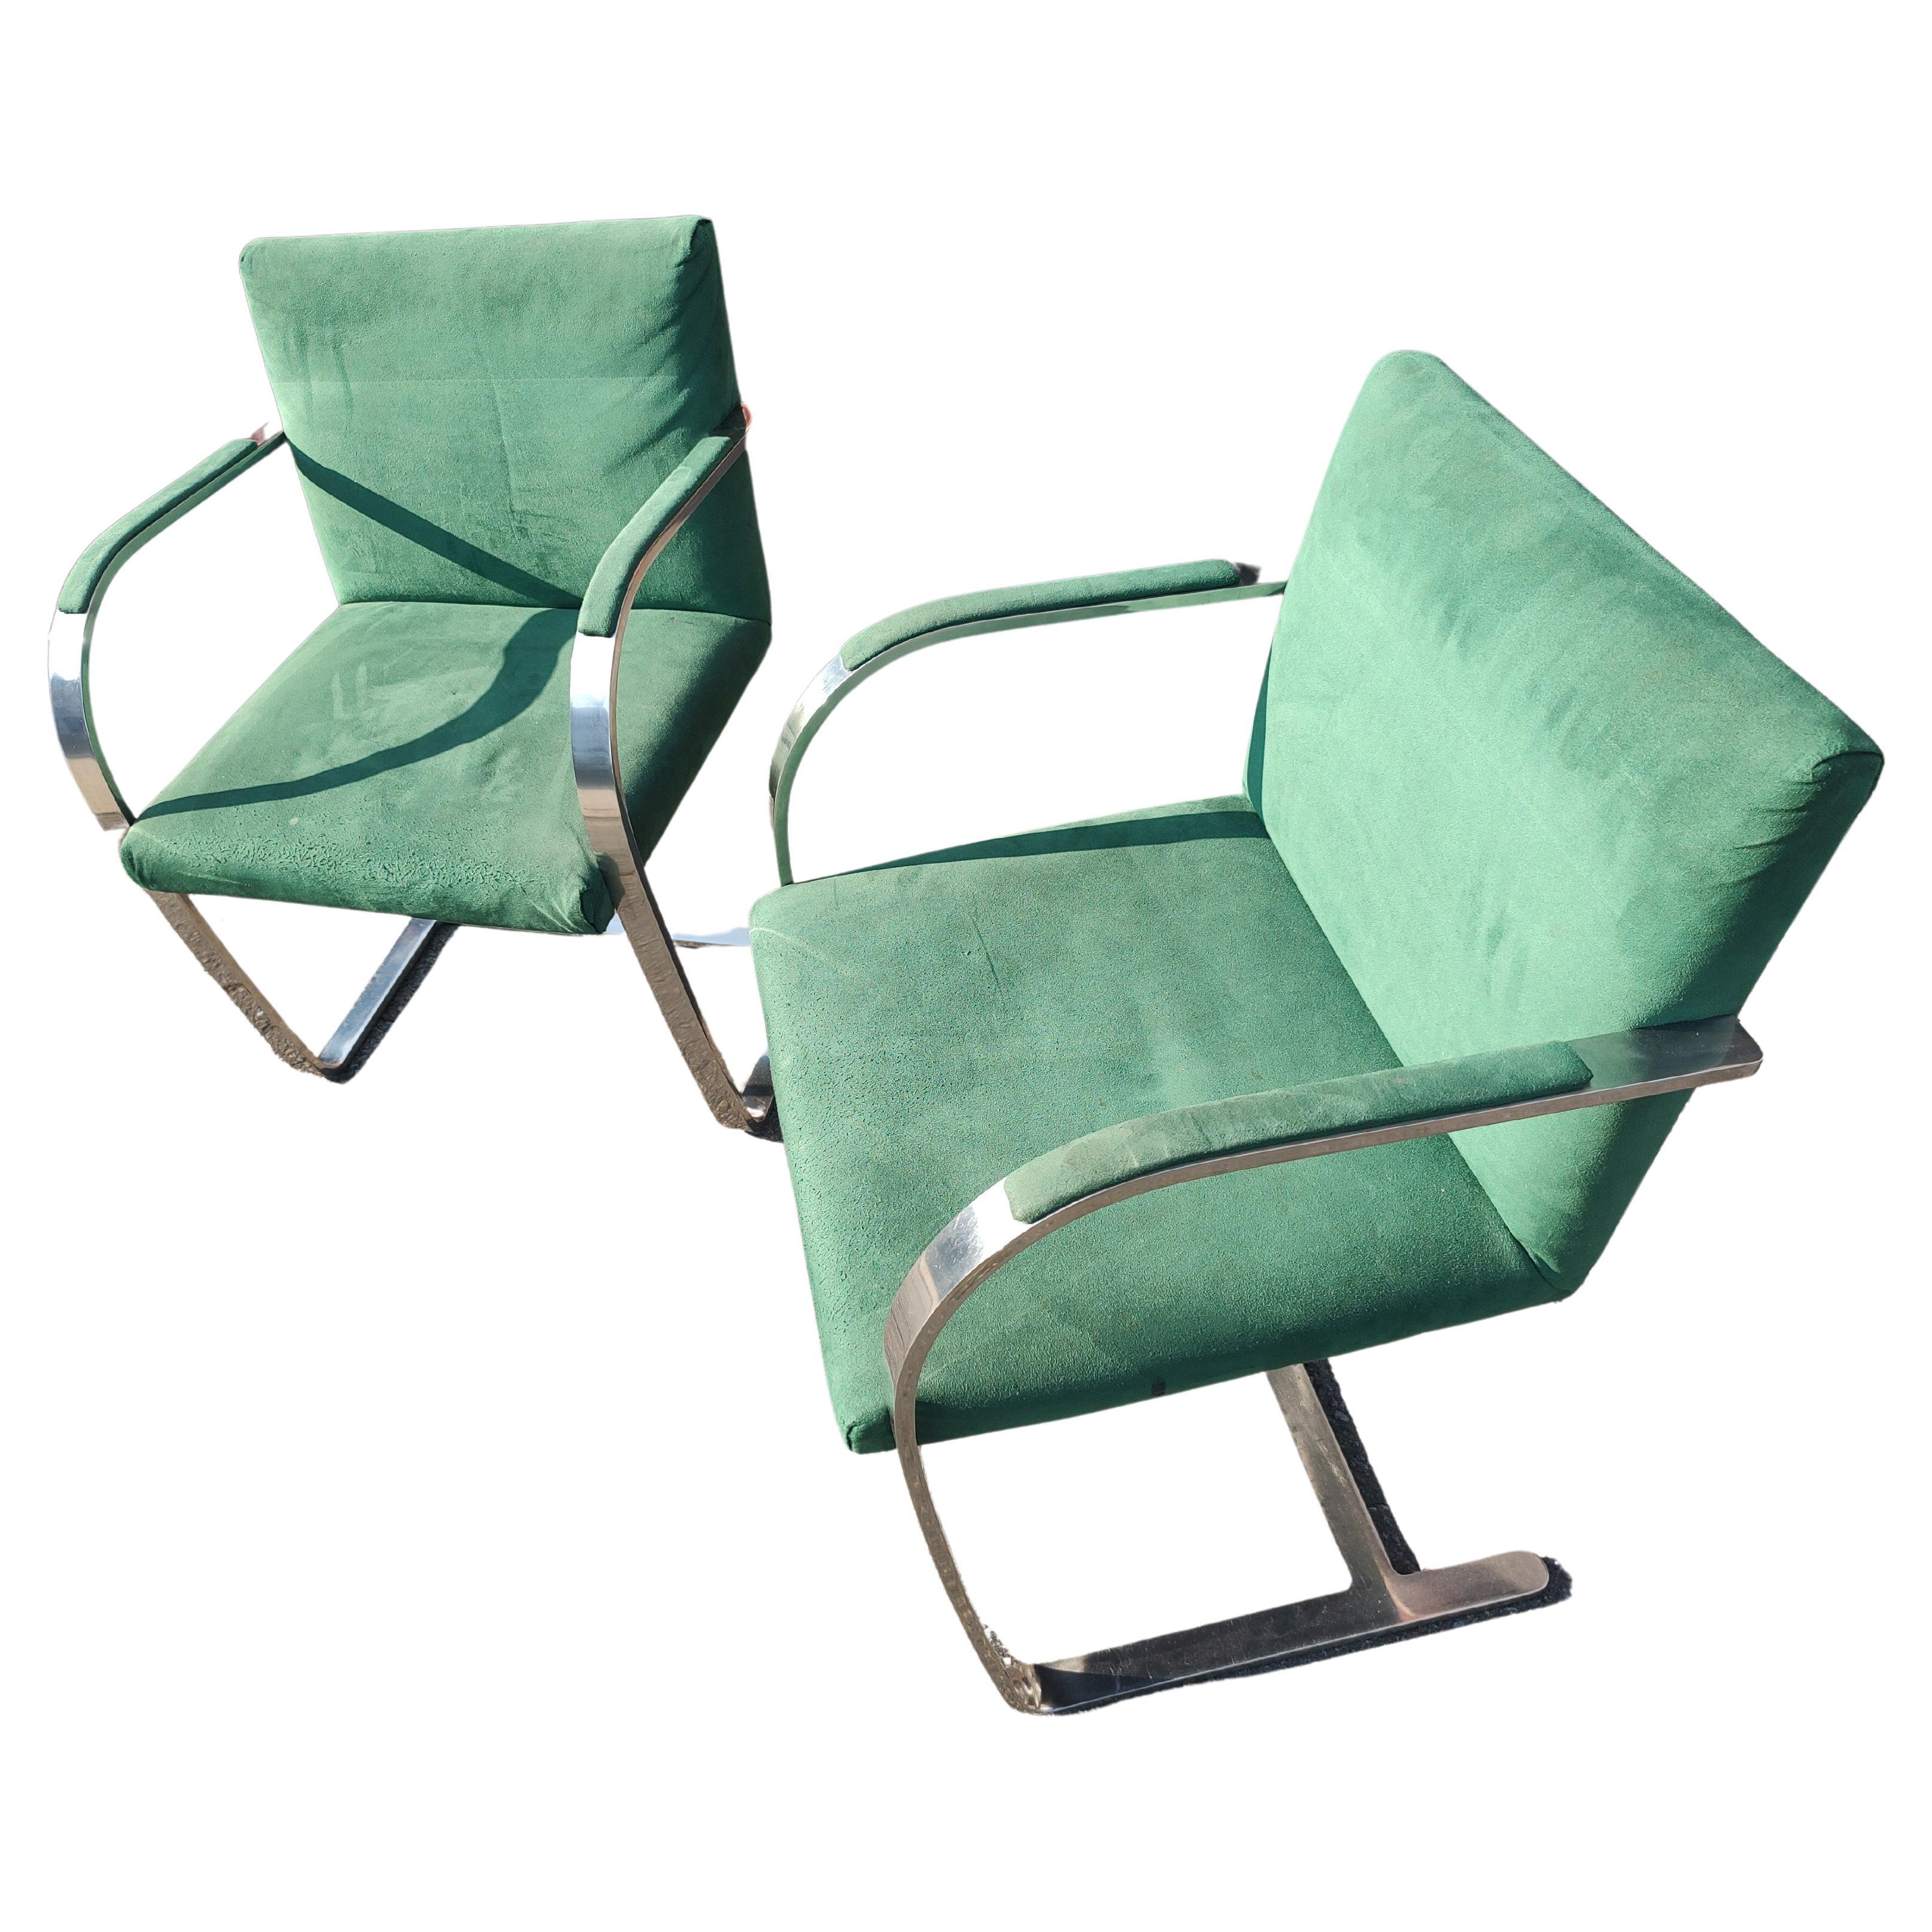 American Pair of Mid Century Modern Bauhaus Styled Brno Chairs  Ludwig Mies van DerRohe  For Sale